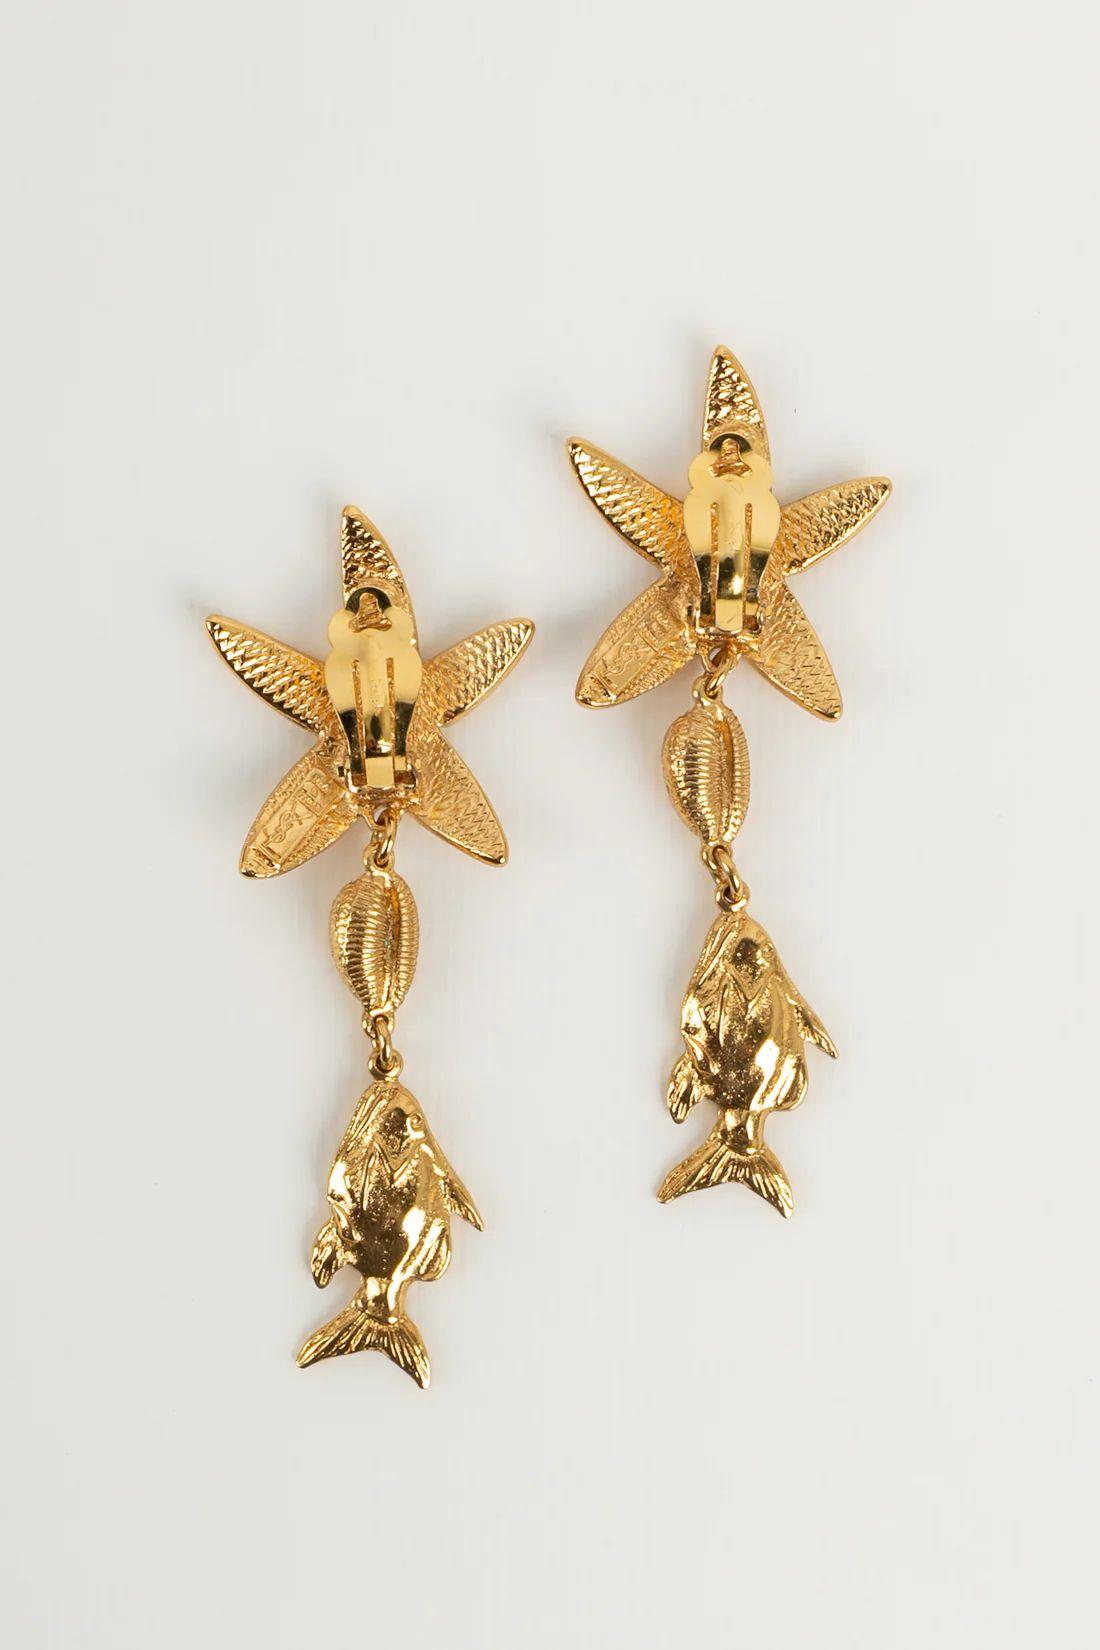 Yves Saint Laurent - (Made in France) Earrings in gold metal and green enamel. Jewel from the 1980s.

Additional information:
Dimensions: 9 L cm

Condition: 
Very good condition

Seller Ref number: BO53